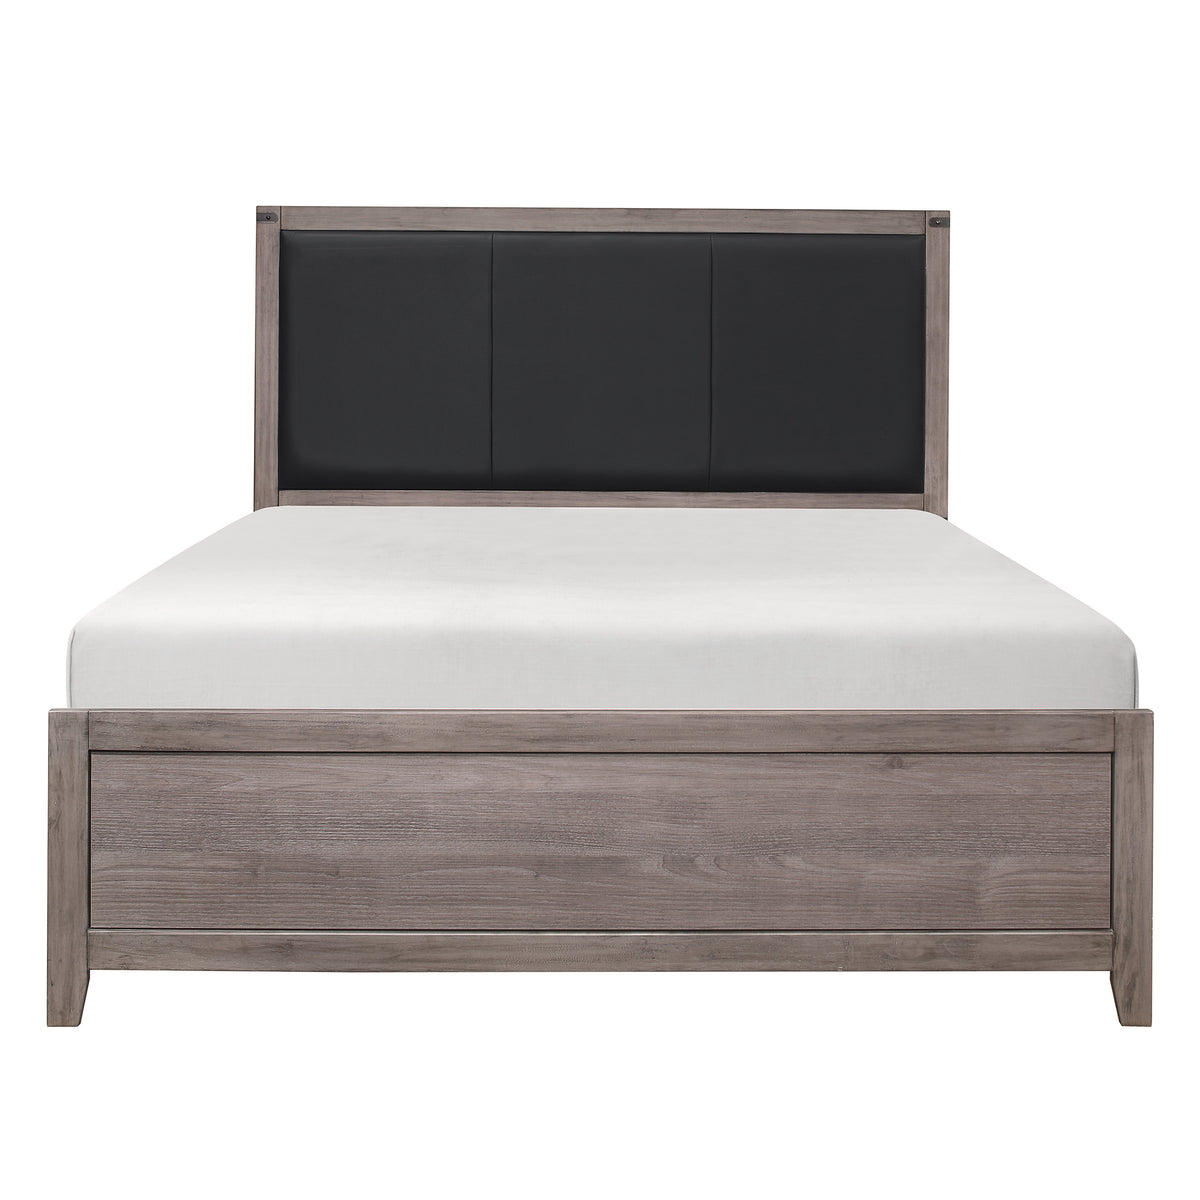 Queen Bed Black Faux Leather Upholstered Headboard - Brownish Grey Finish